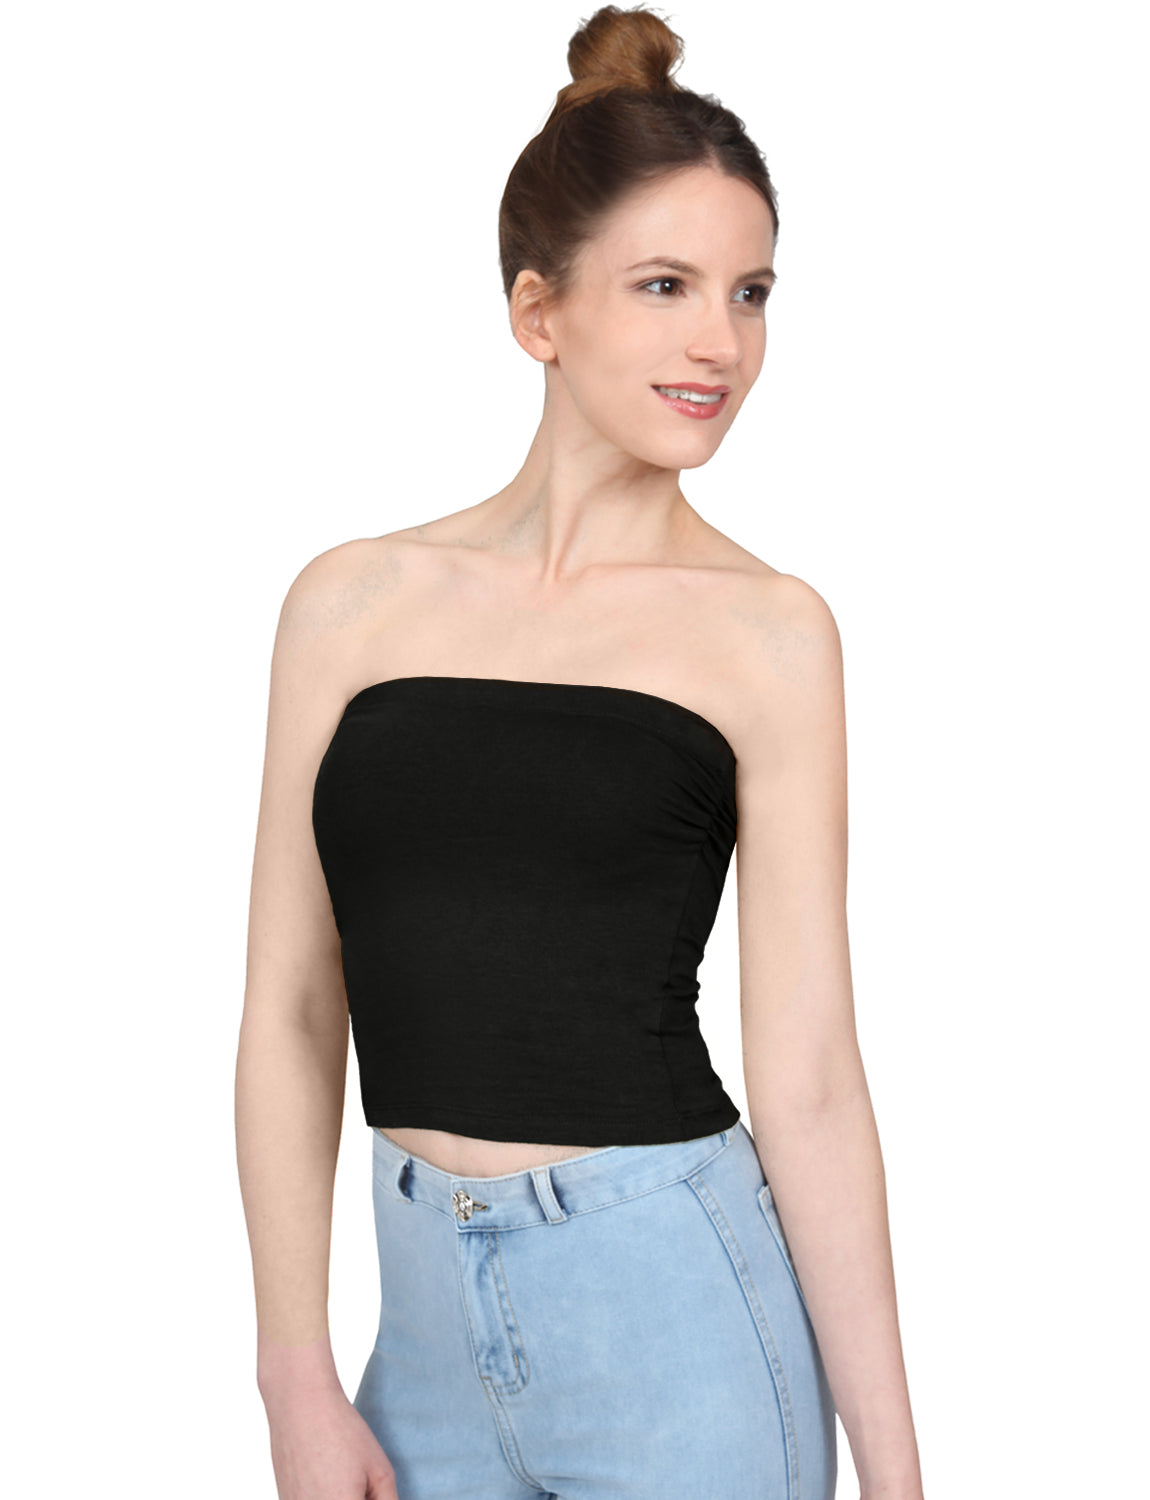 STRETCHY SEAMLESS STRAPLESS CROP TUBE TOP WITH BUILT-IN SHELF BRA